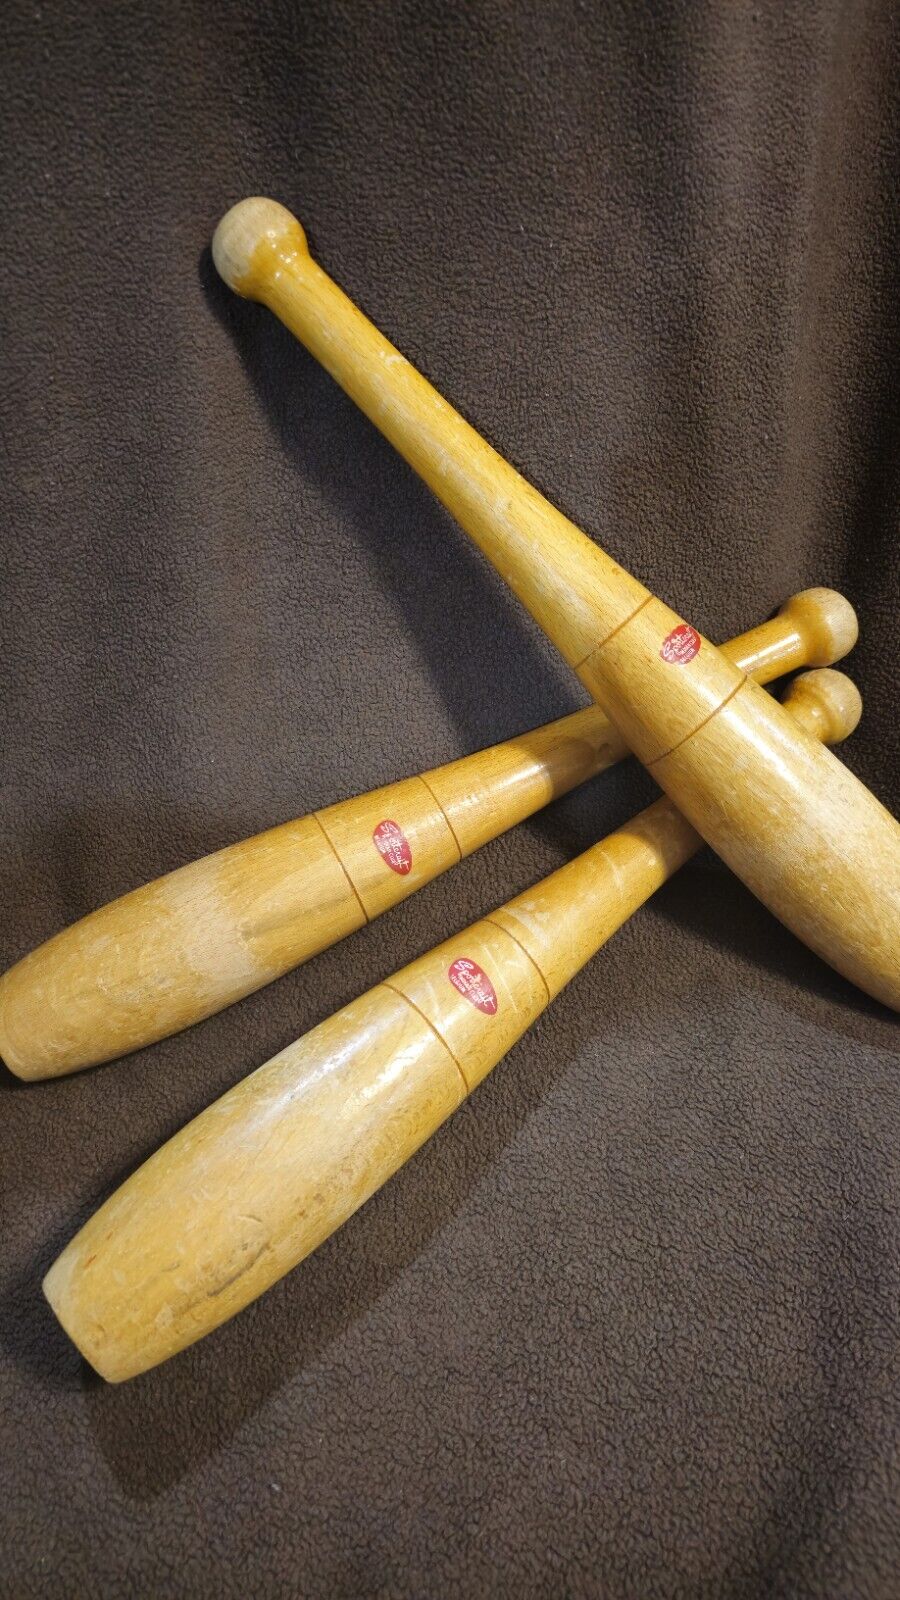 Sportcraft Belgium Wooden Indian Club. 16 Inch And 16 oz